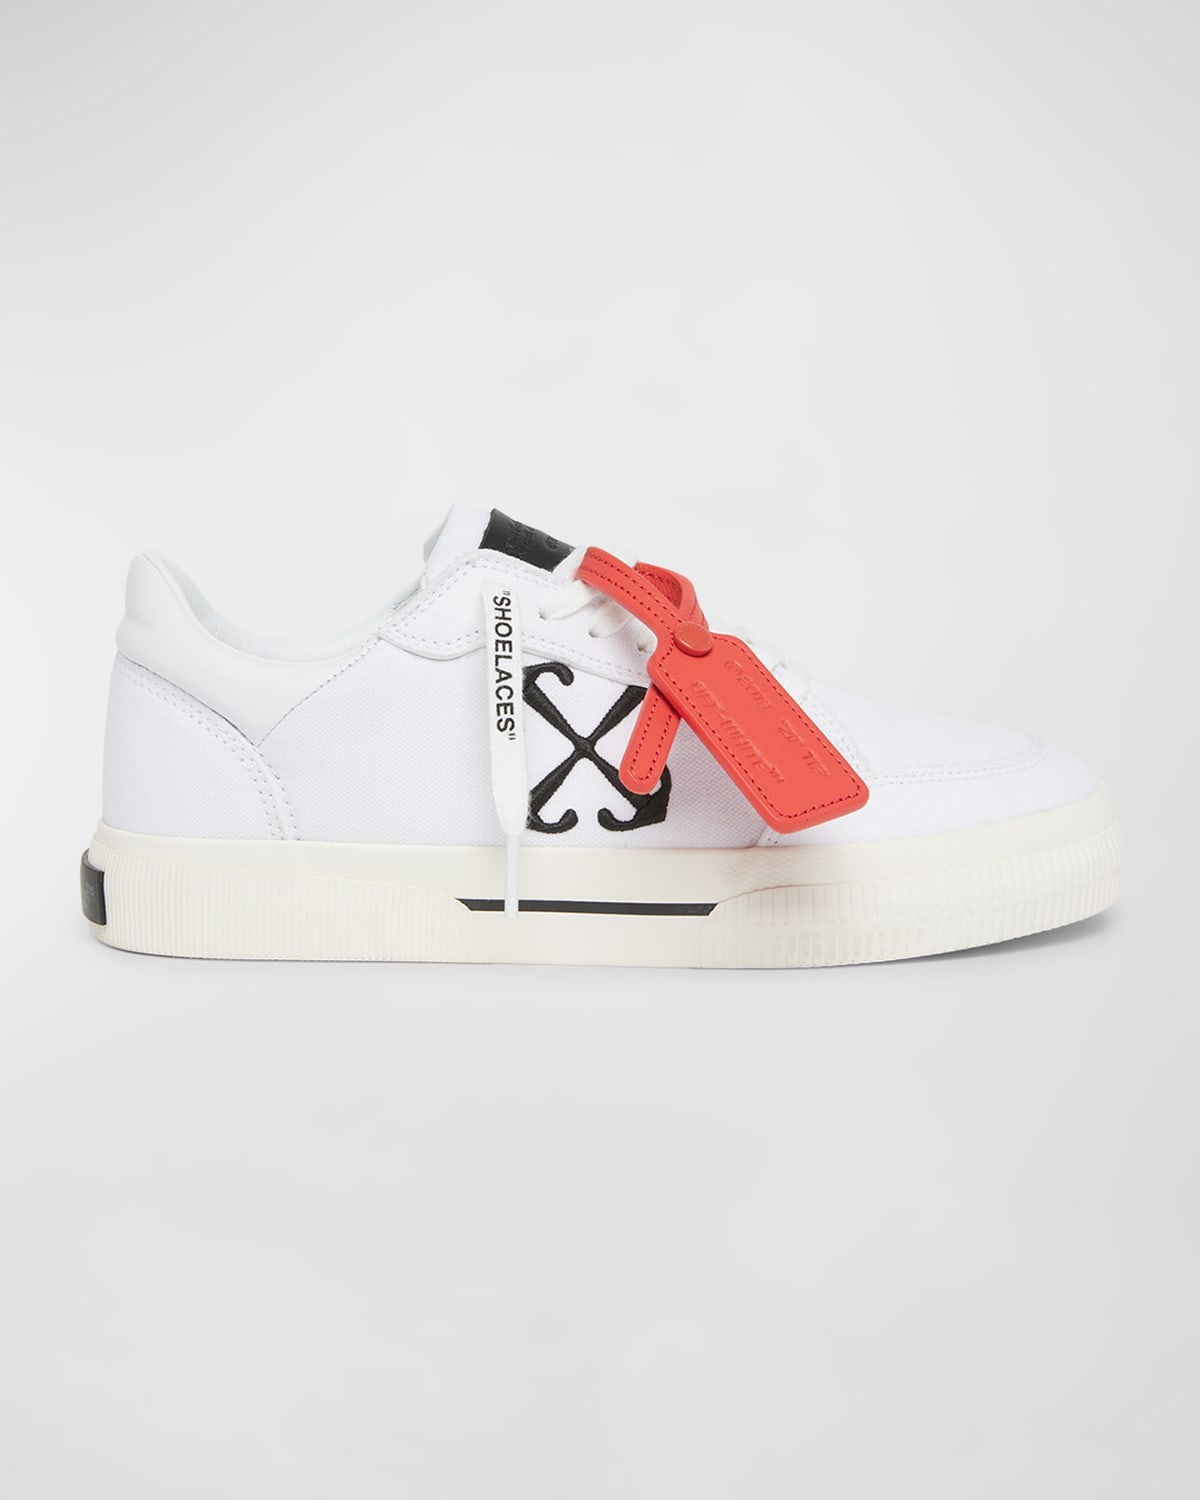 Off-white Vulcanized Canvas Low-top Sneakers In White Black